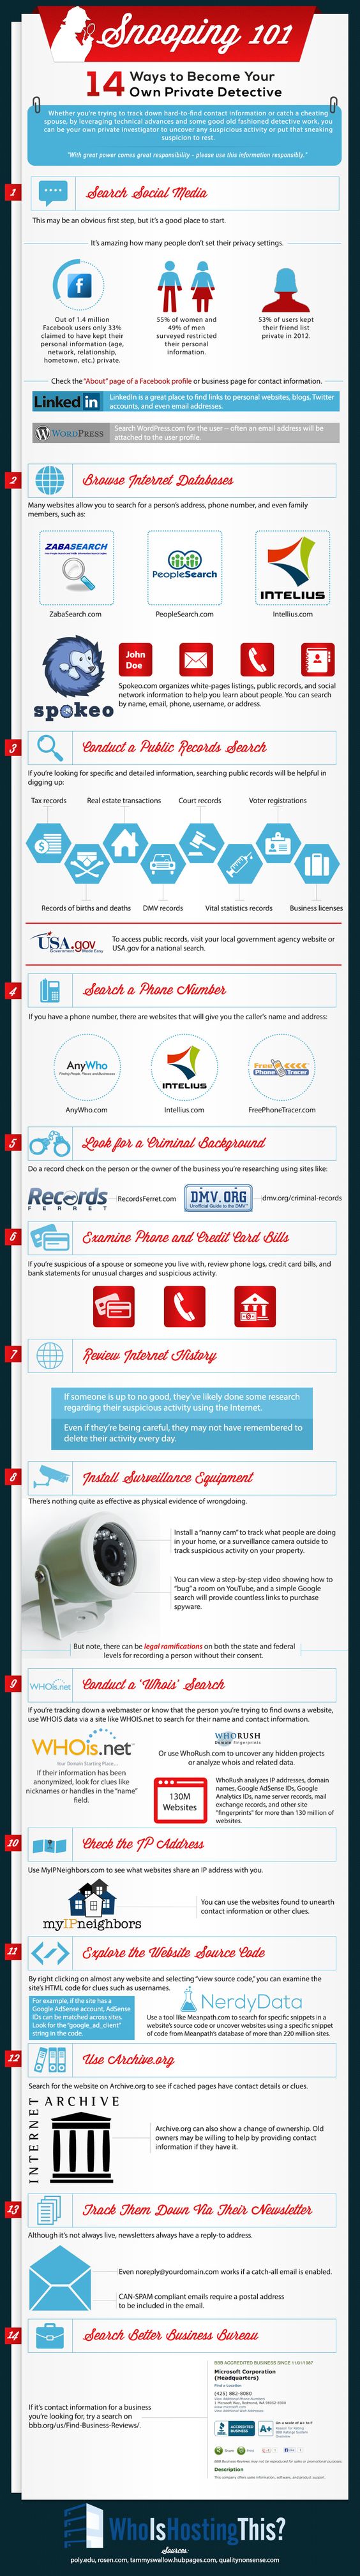 Snooping 101: How To Become Your Own Private Detective - infographic #ecommerce /